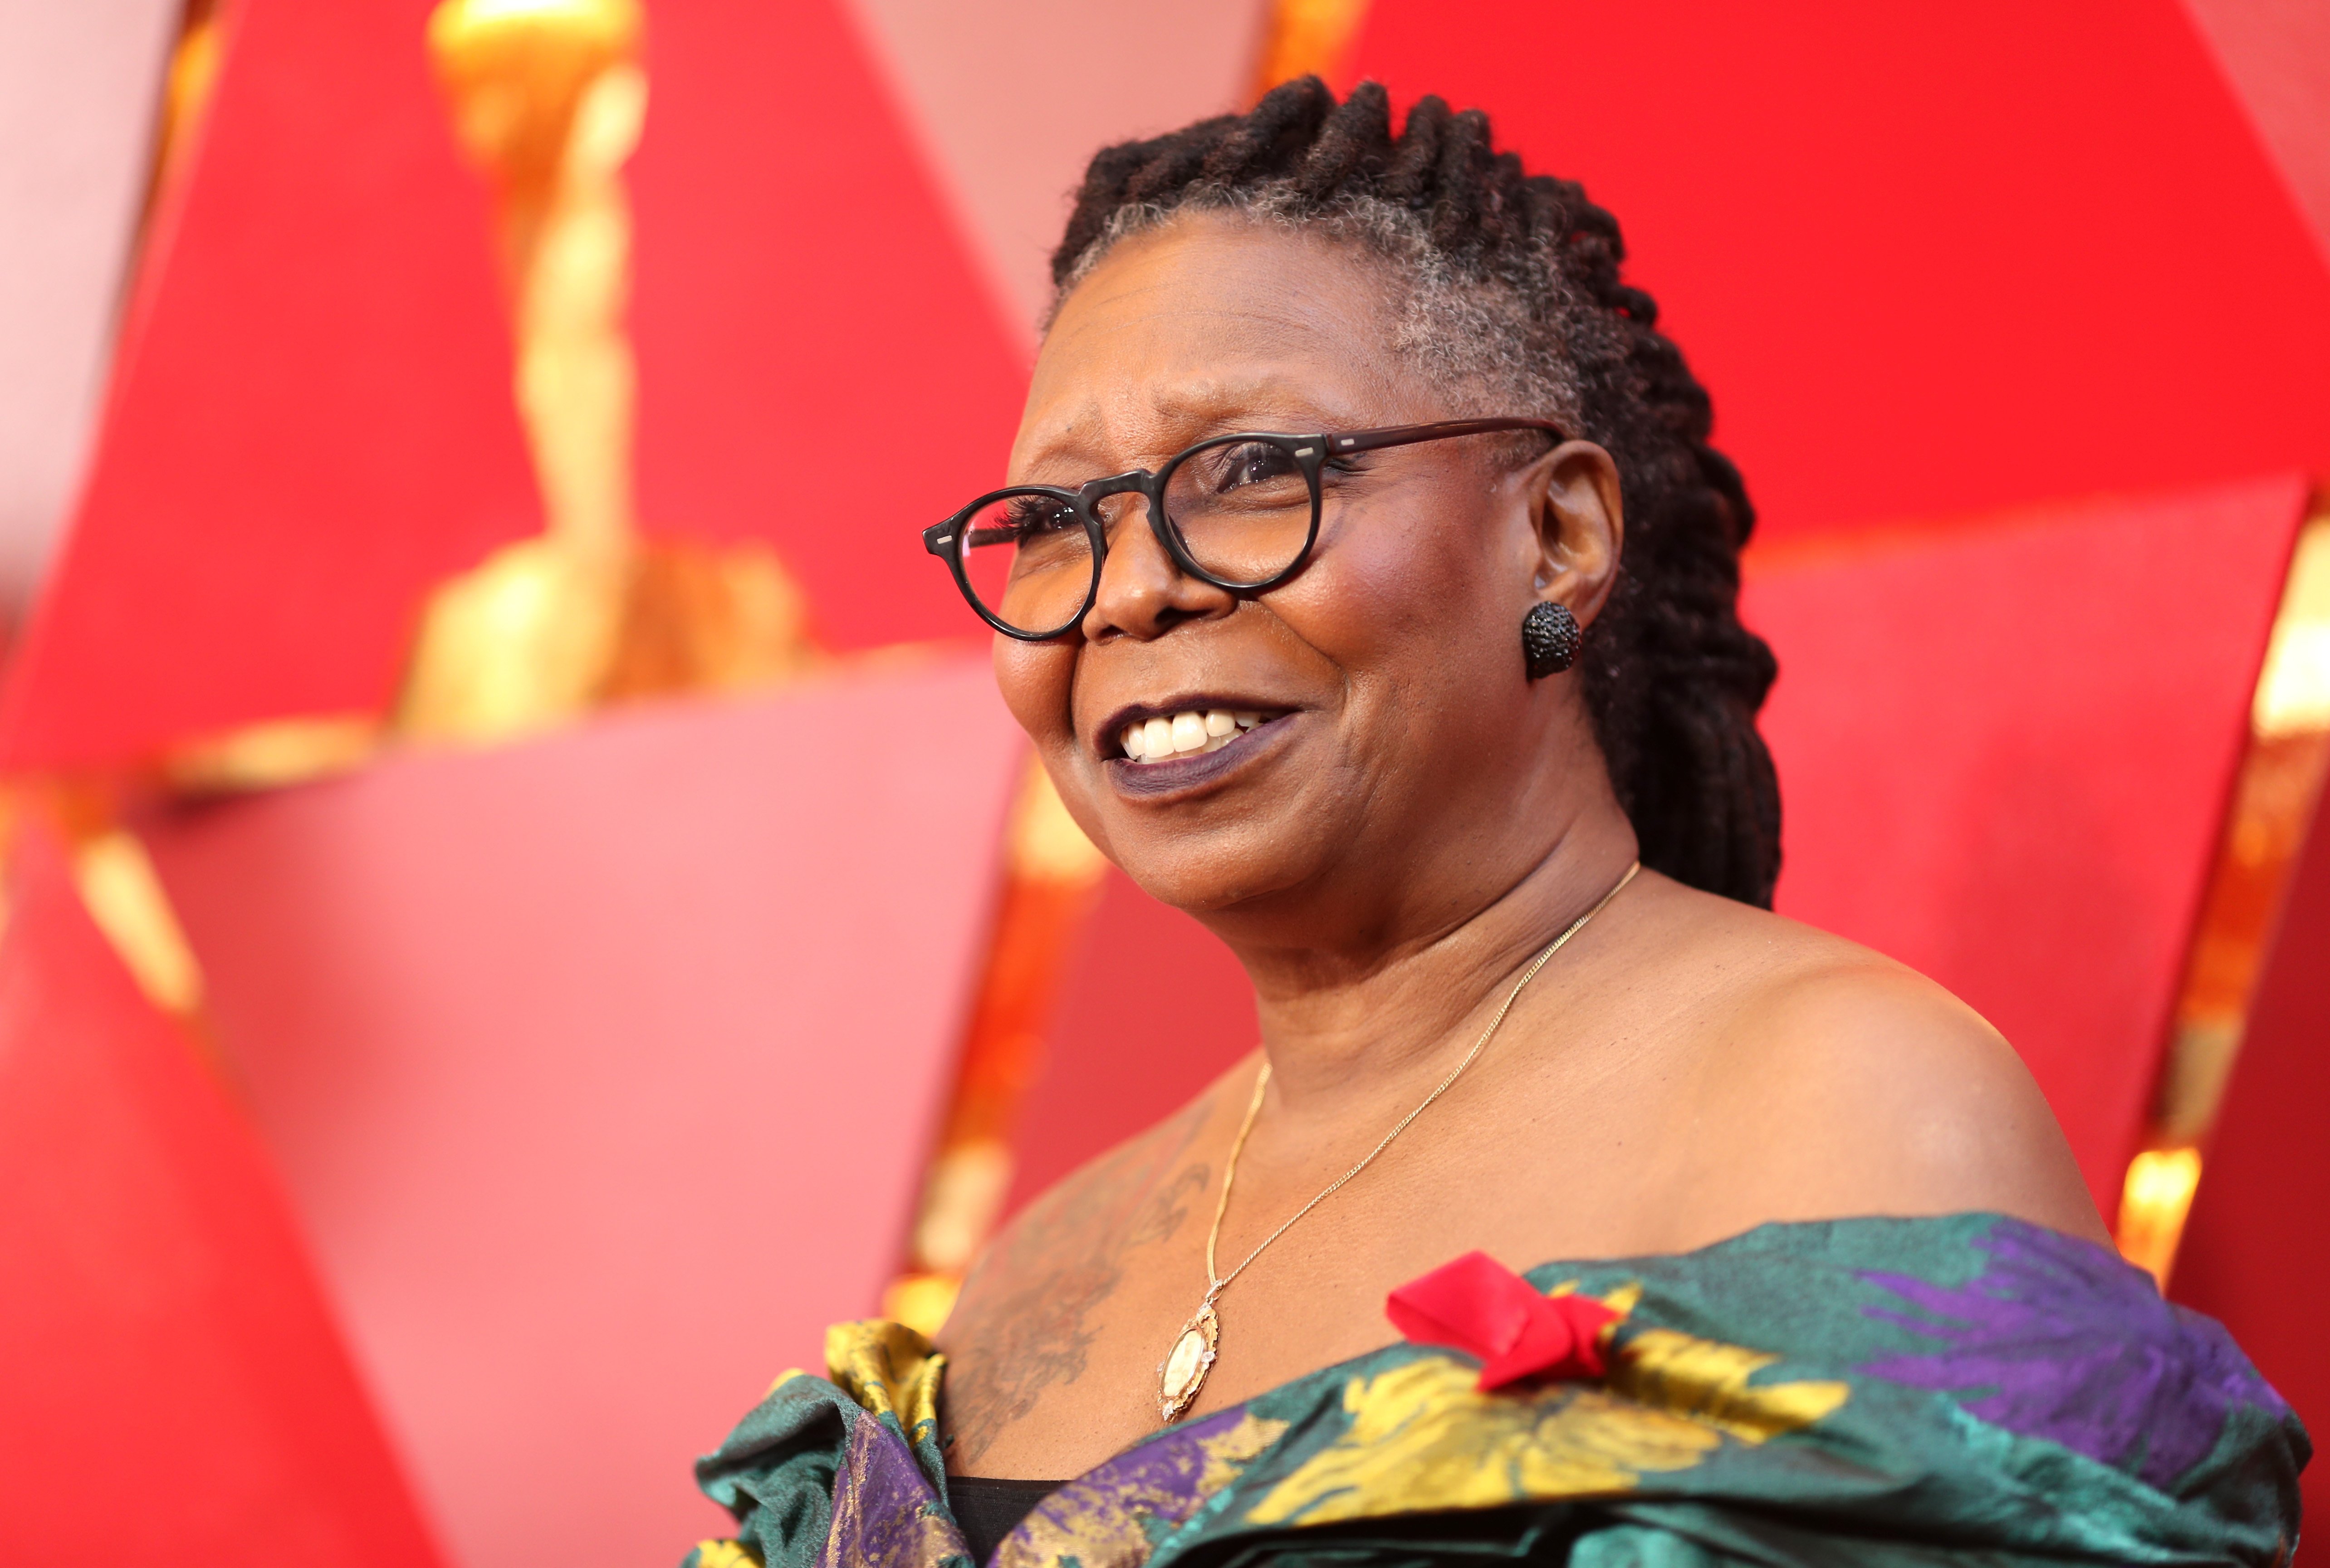 Whoopi Goldberg at the 90th Annual Academy Awards on Mar. 4, 2018 in California | Photo: Getty Images